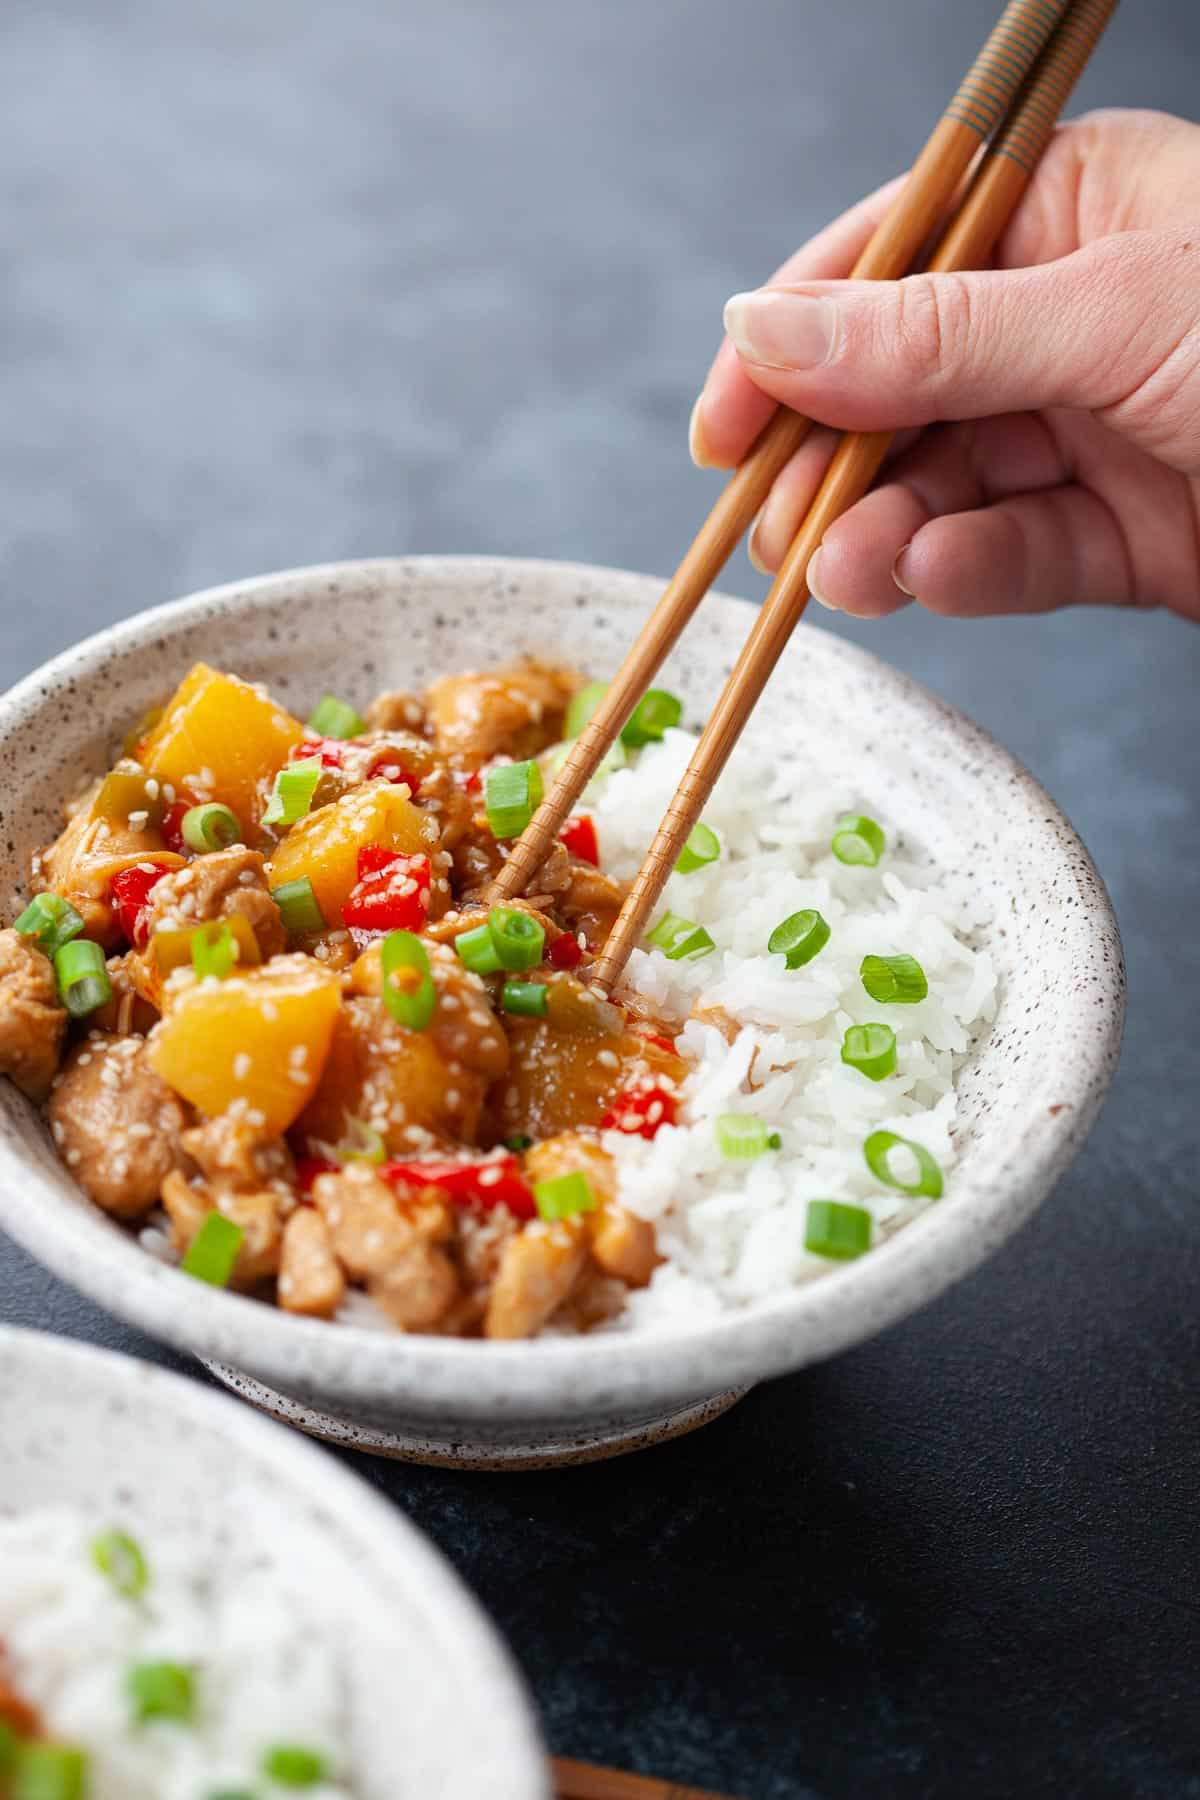 bowl of sweet and sour chicken served with white rice, green onion. hand holding chopsticks 